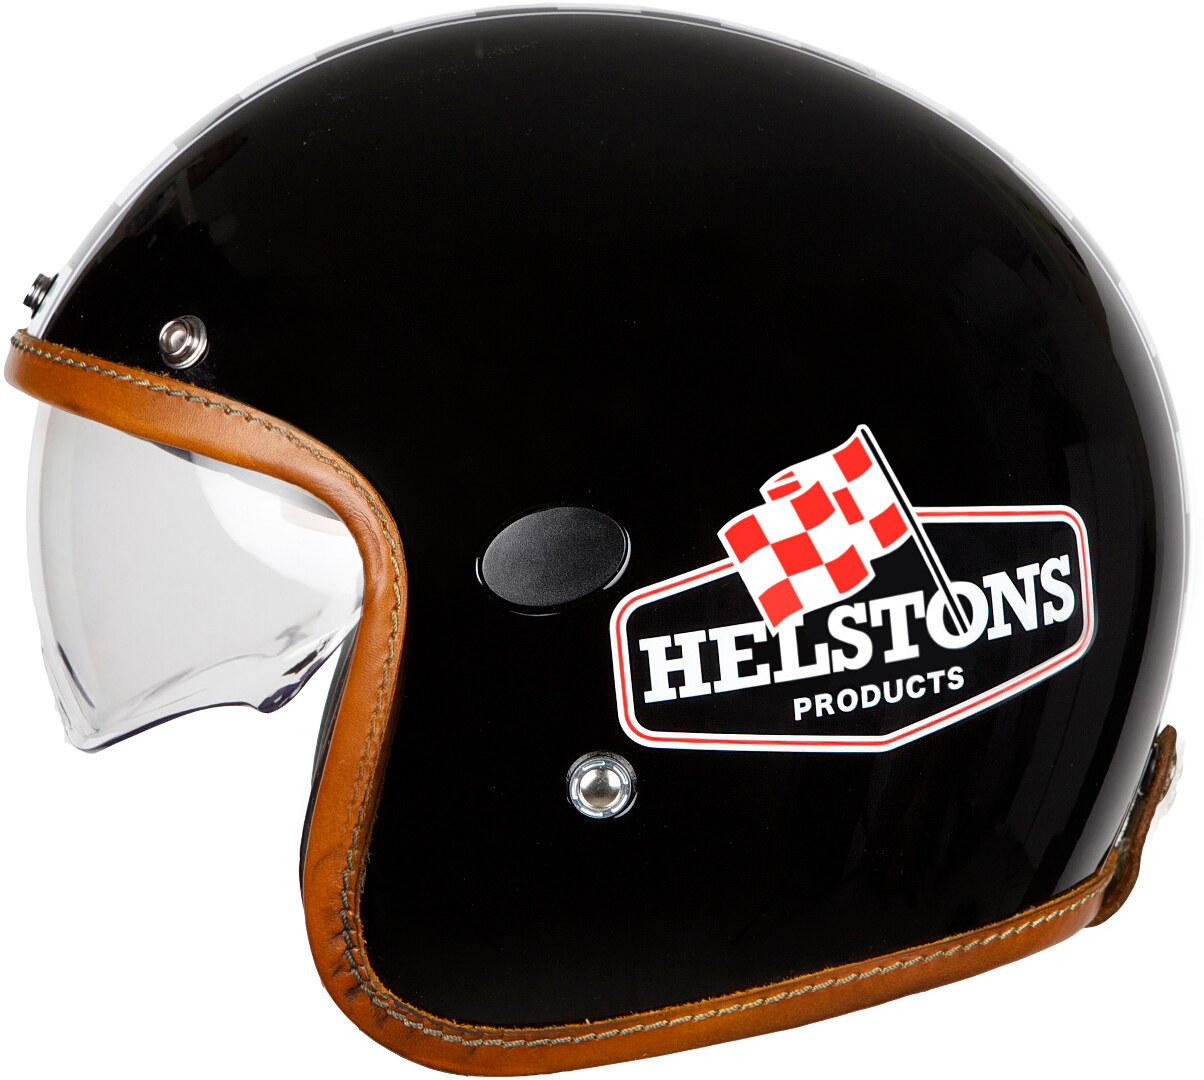 Image of Helstons Flag Carbon Casco a getto, nero, dimensione XL